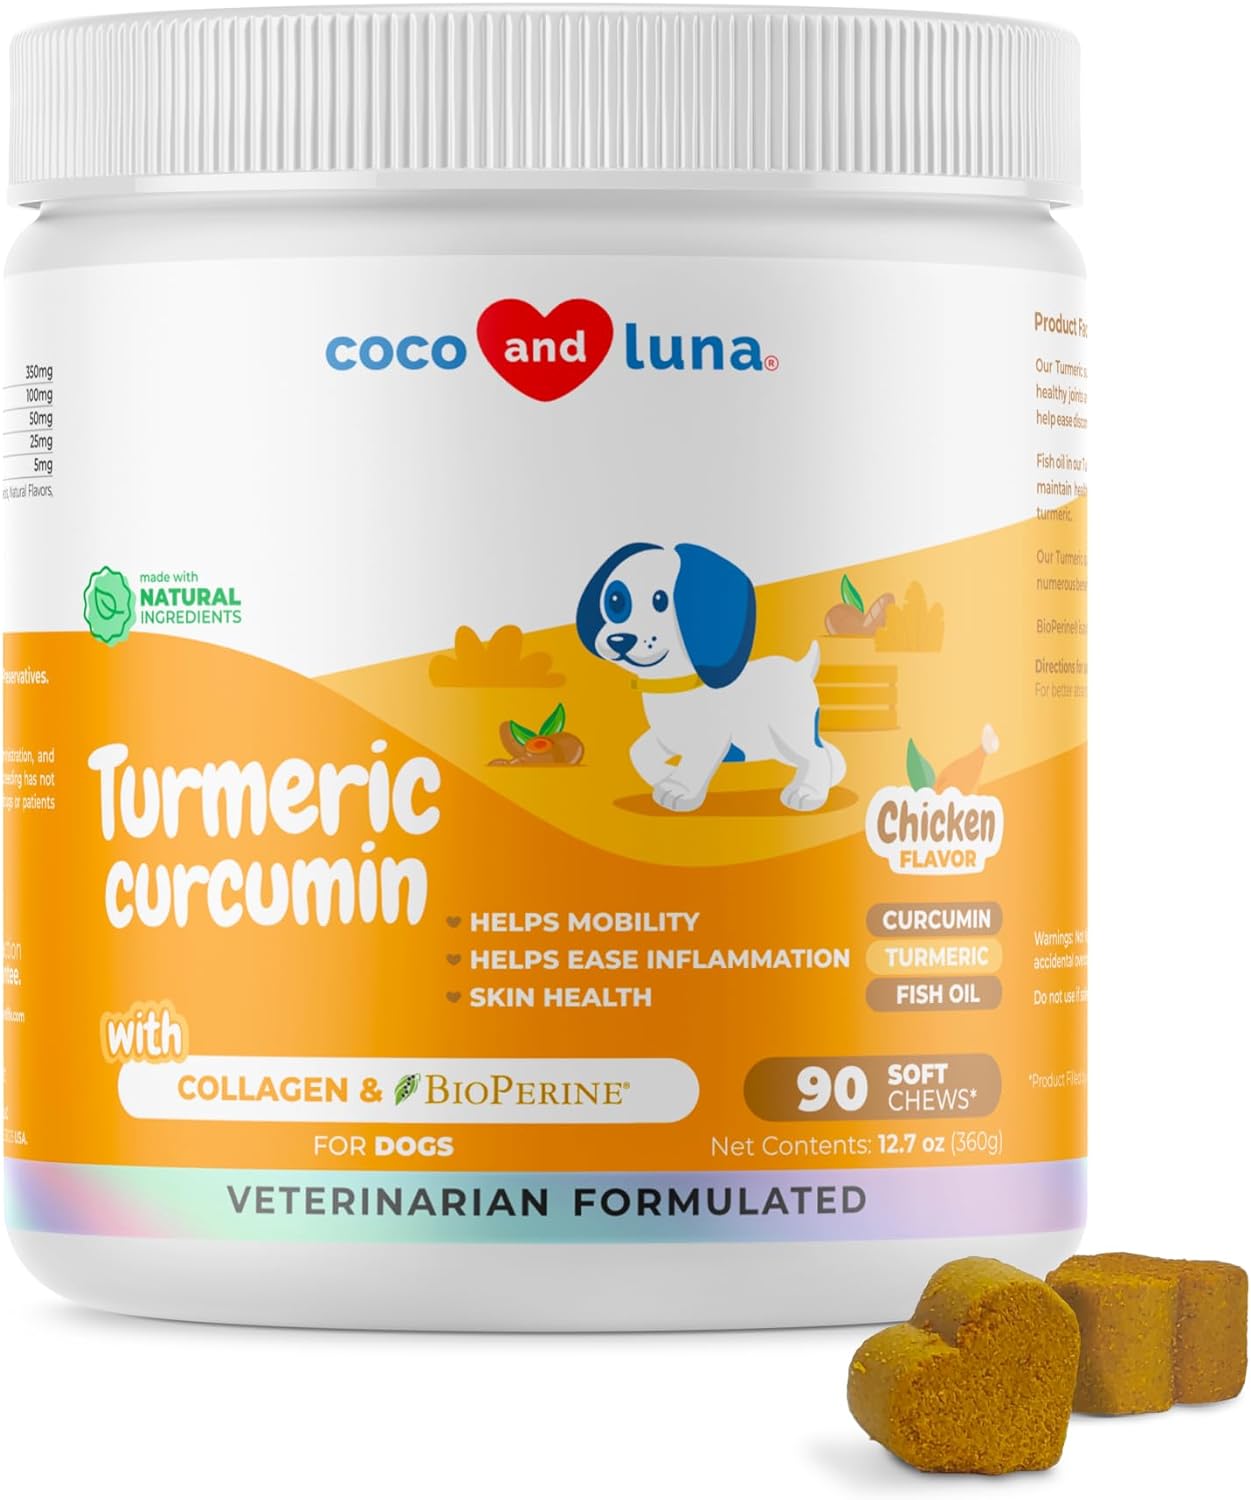 Turmeric Curcumin for Dogs - 90 Soft Chews - with Collagen, BioPerine and Fish Oil - Hip & Joint Support, Ease Inflammation, Antioxidant, Cardiovascular & Liver Support. (Soft Chews)